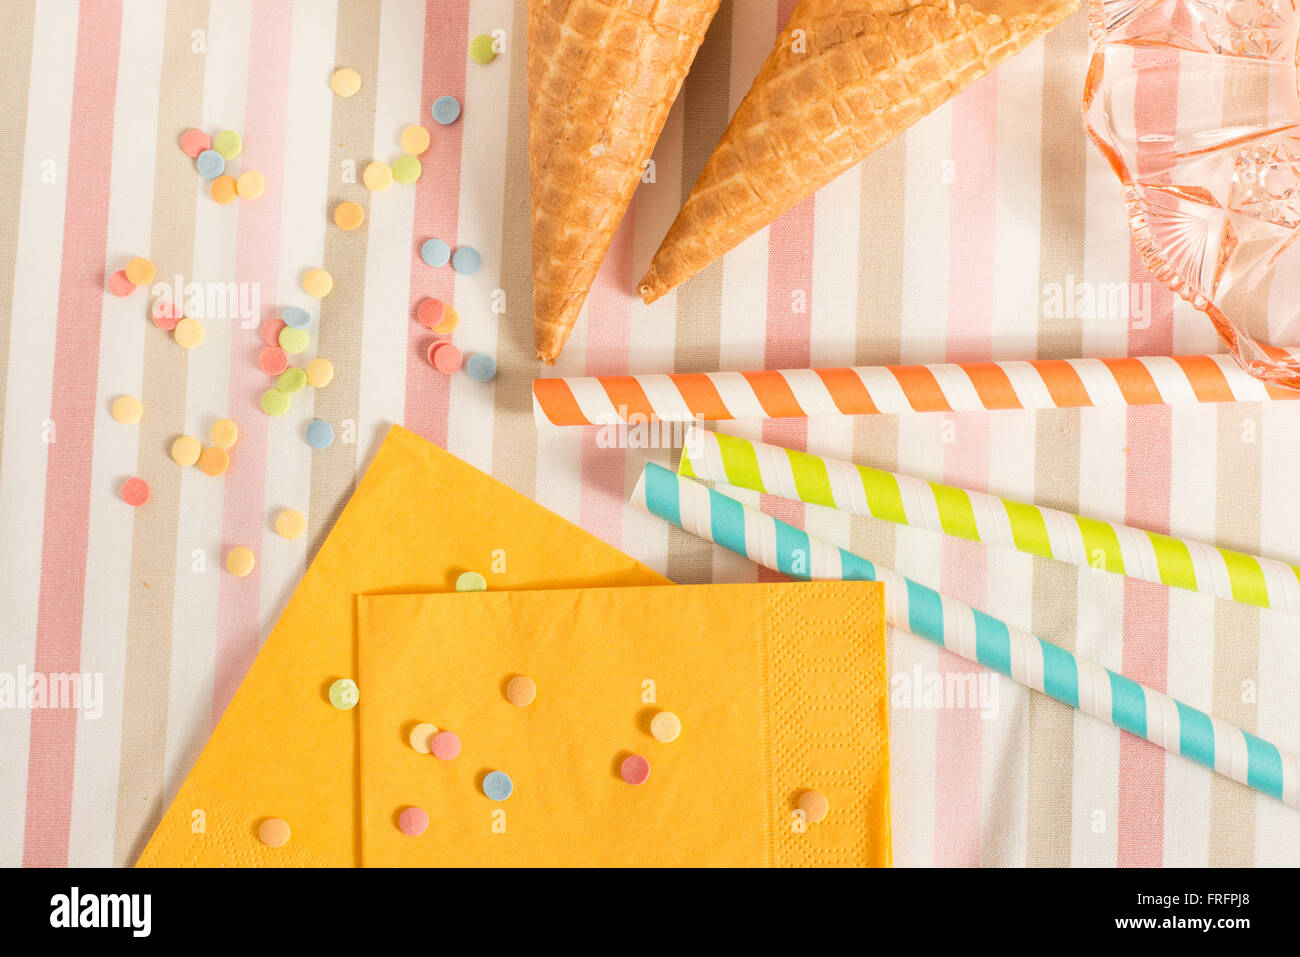 Colorful sugar sprinkles, straws and ice cream cones. Preparation for party or celebration. Concept of food styling. Stock Photo